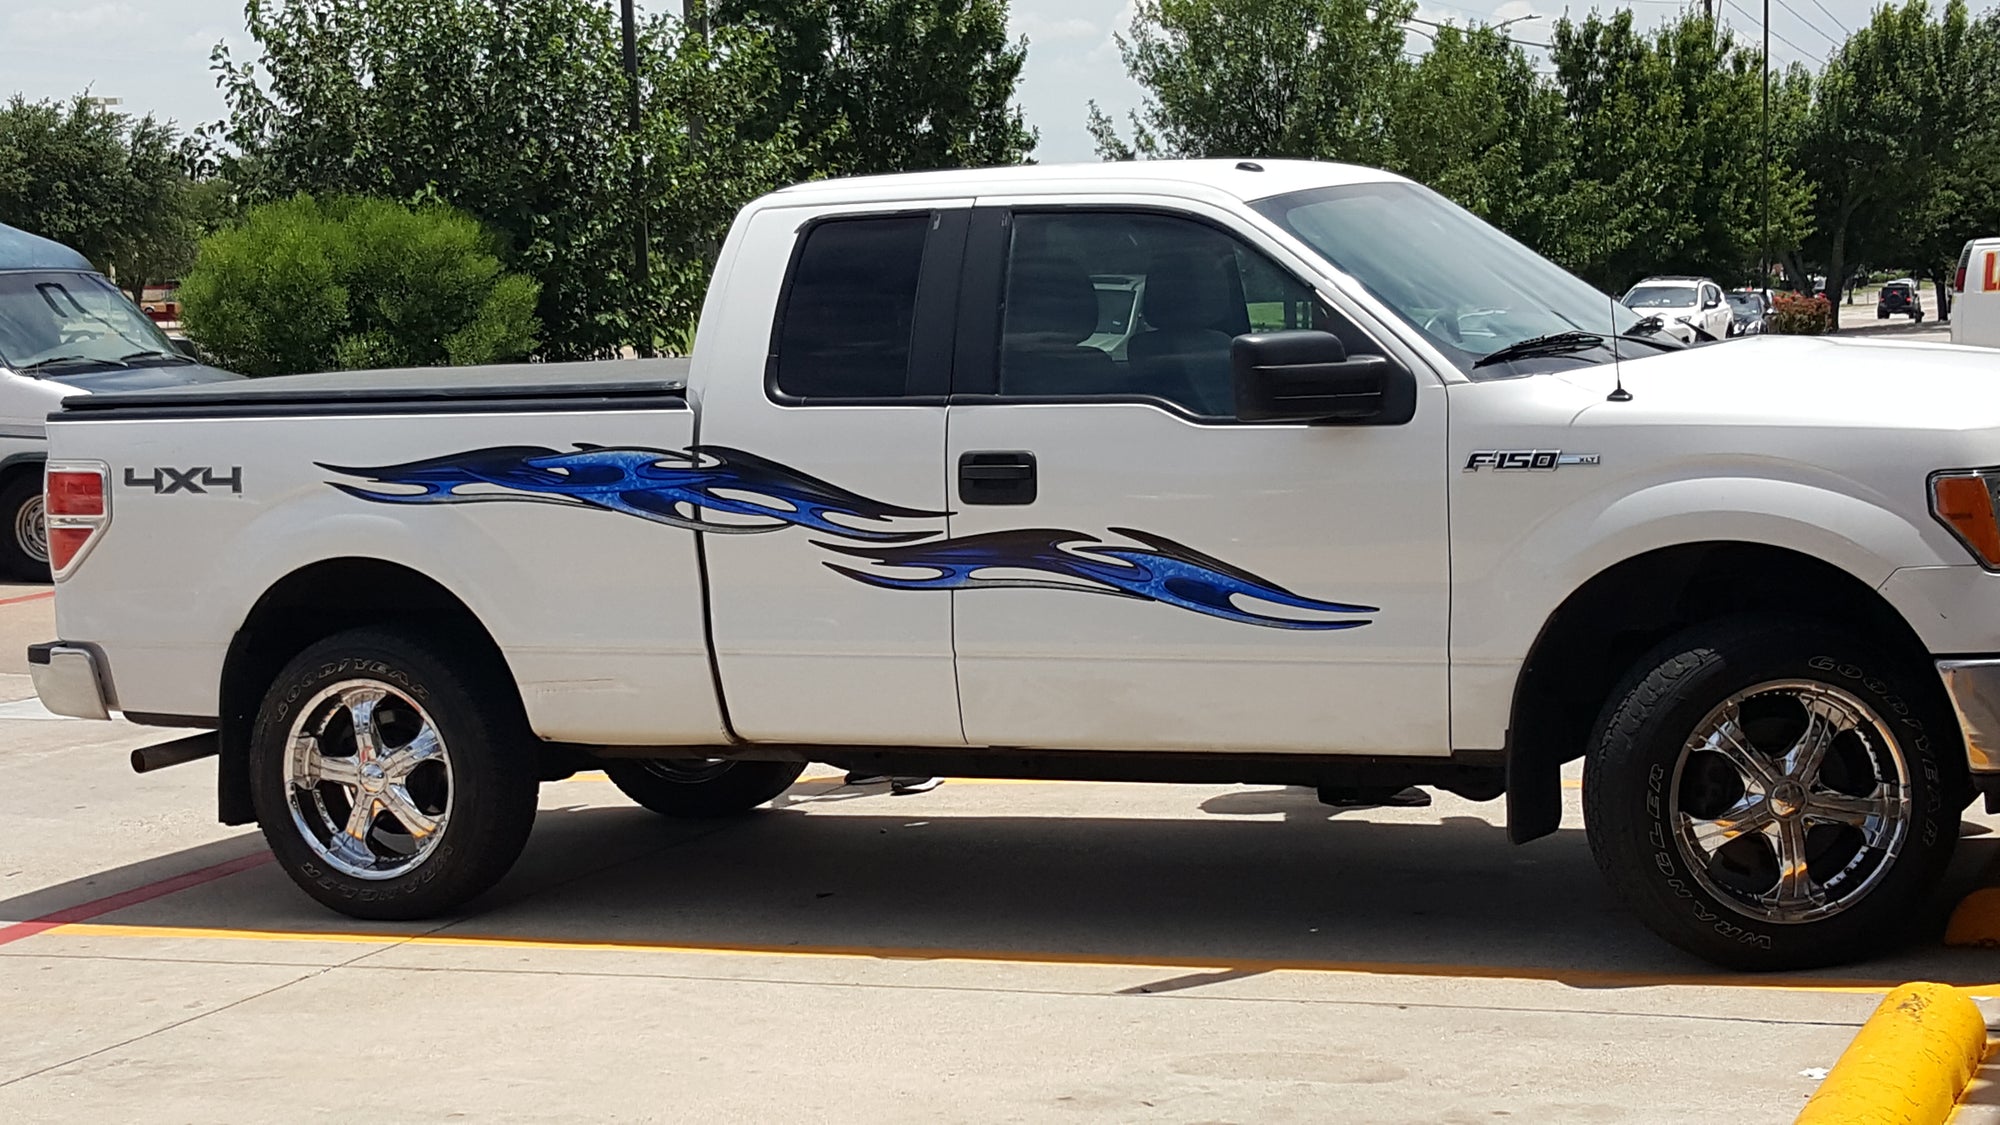 blue tribal chain decal on a white pick up truck